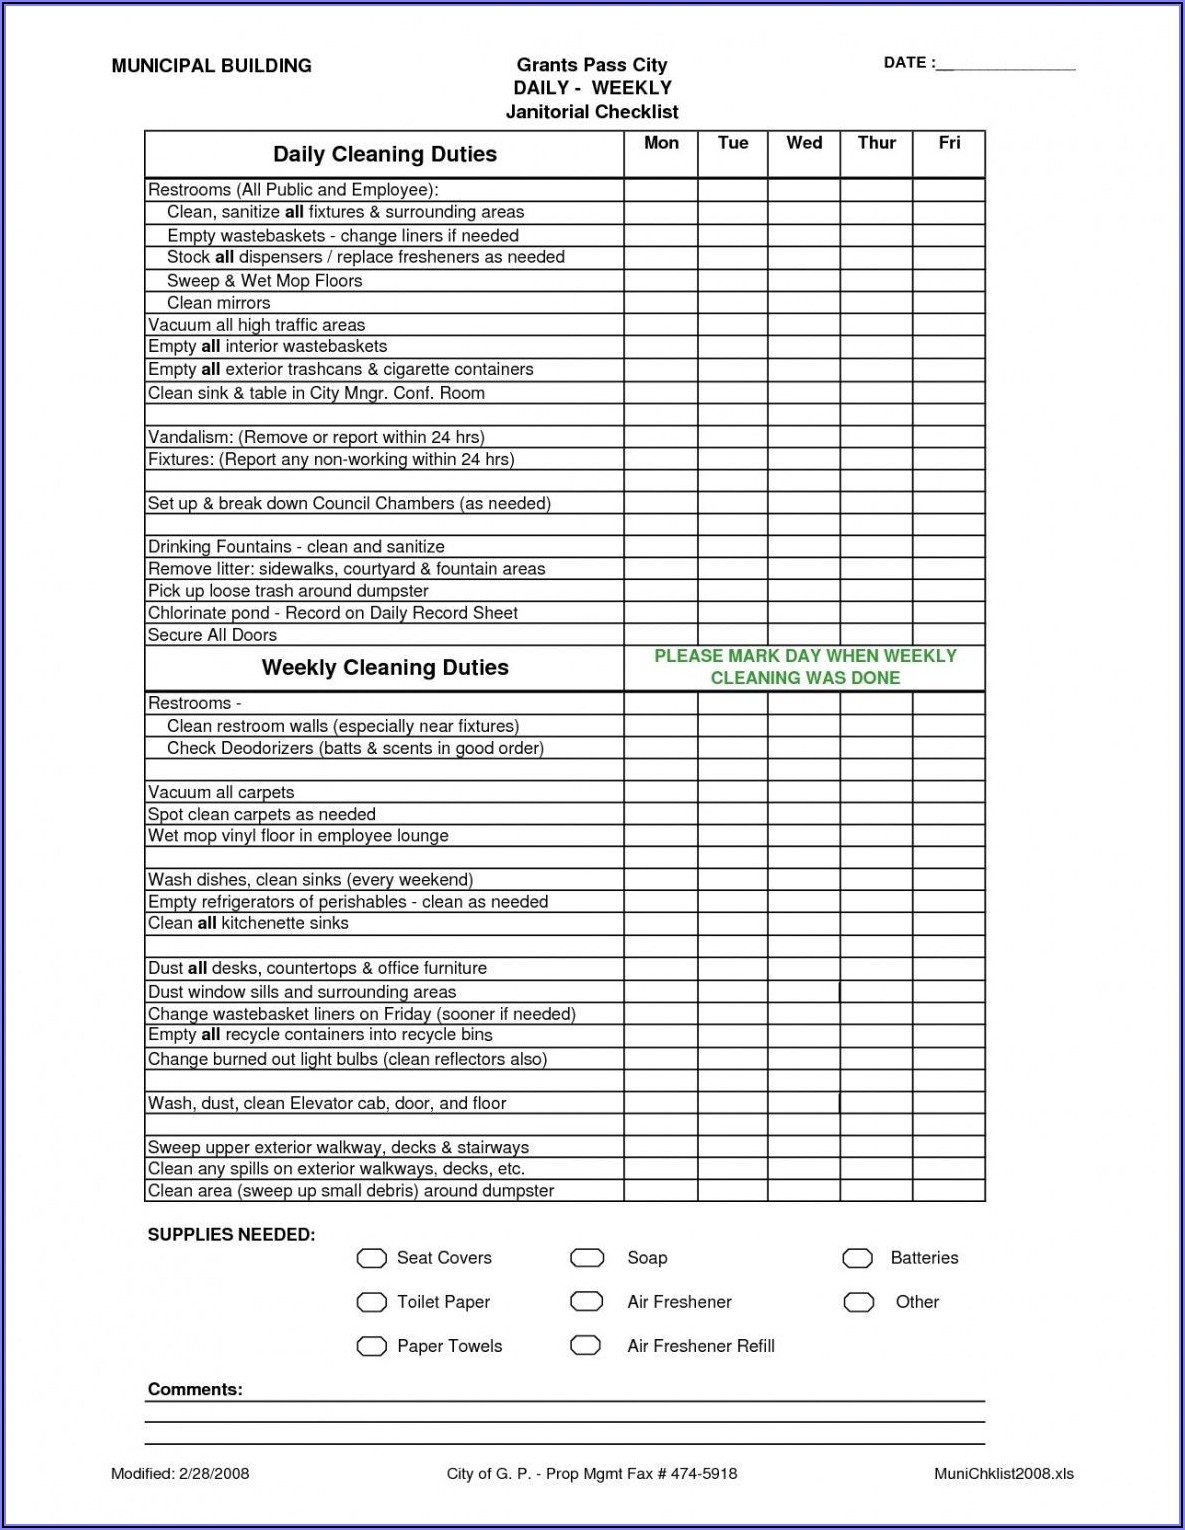 Dental Office Cleaning Schedule Template